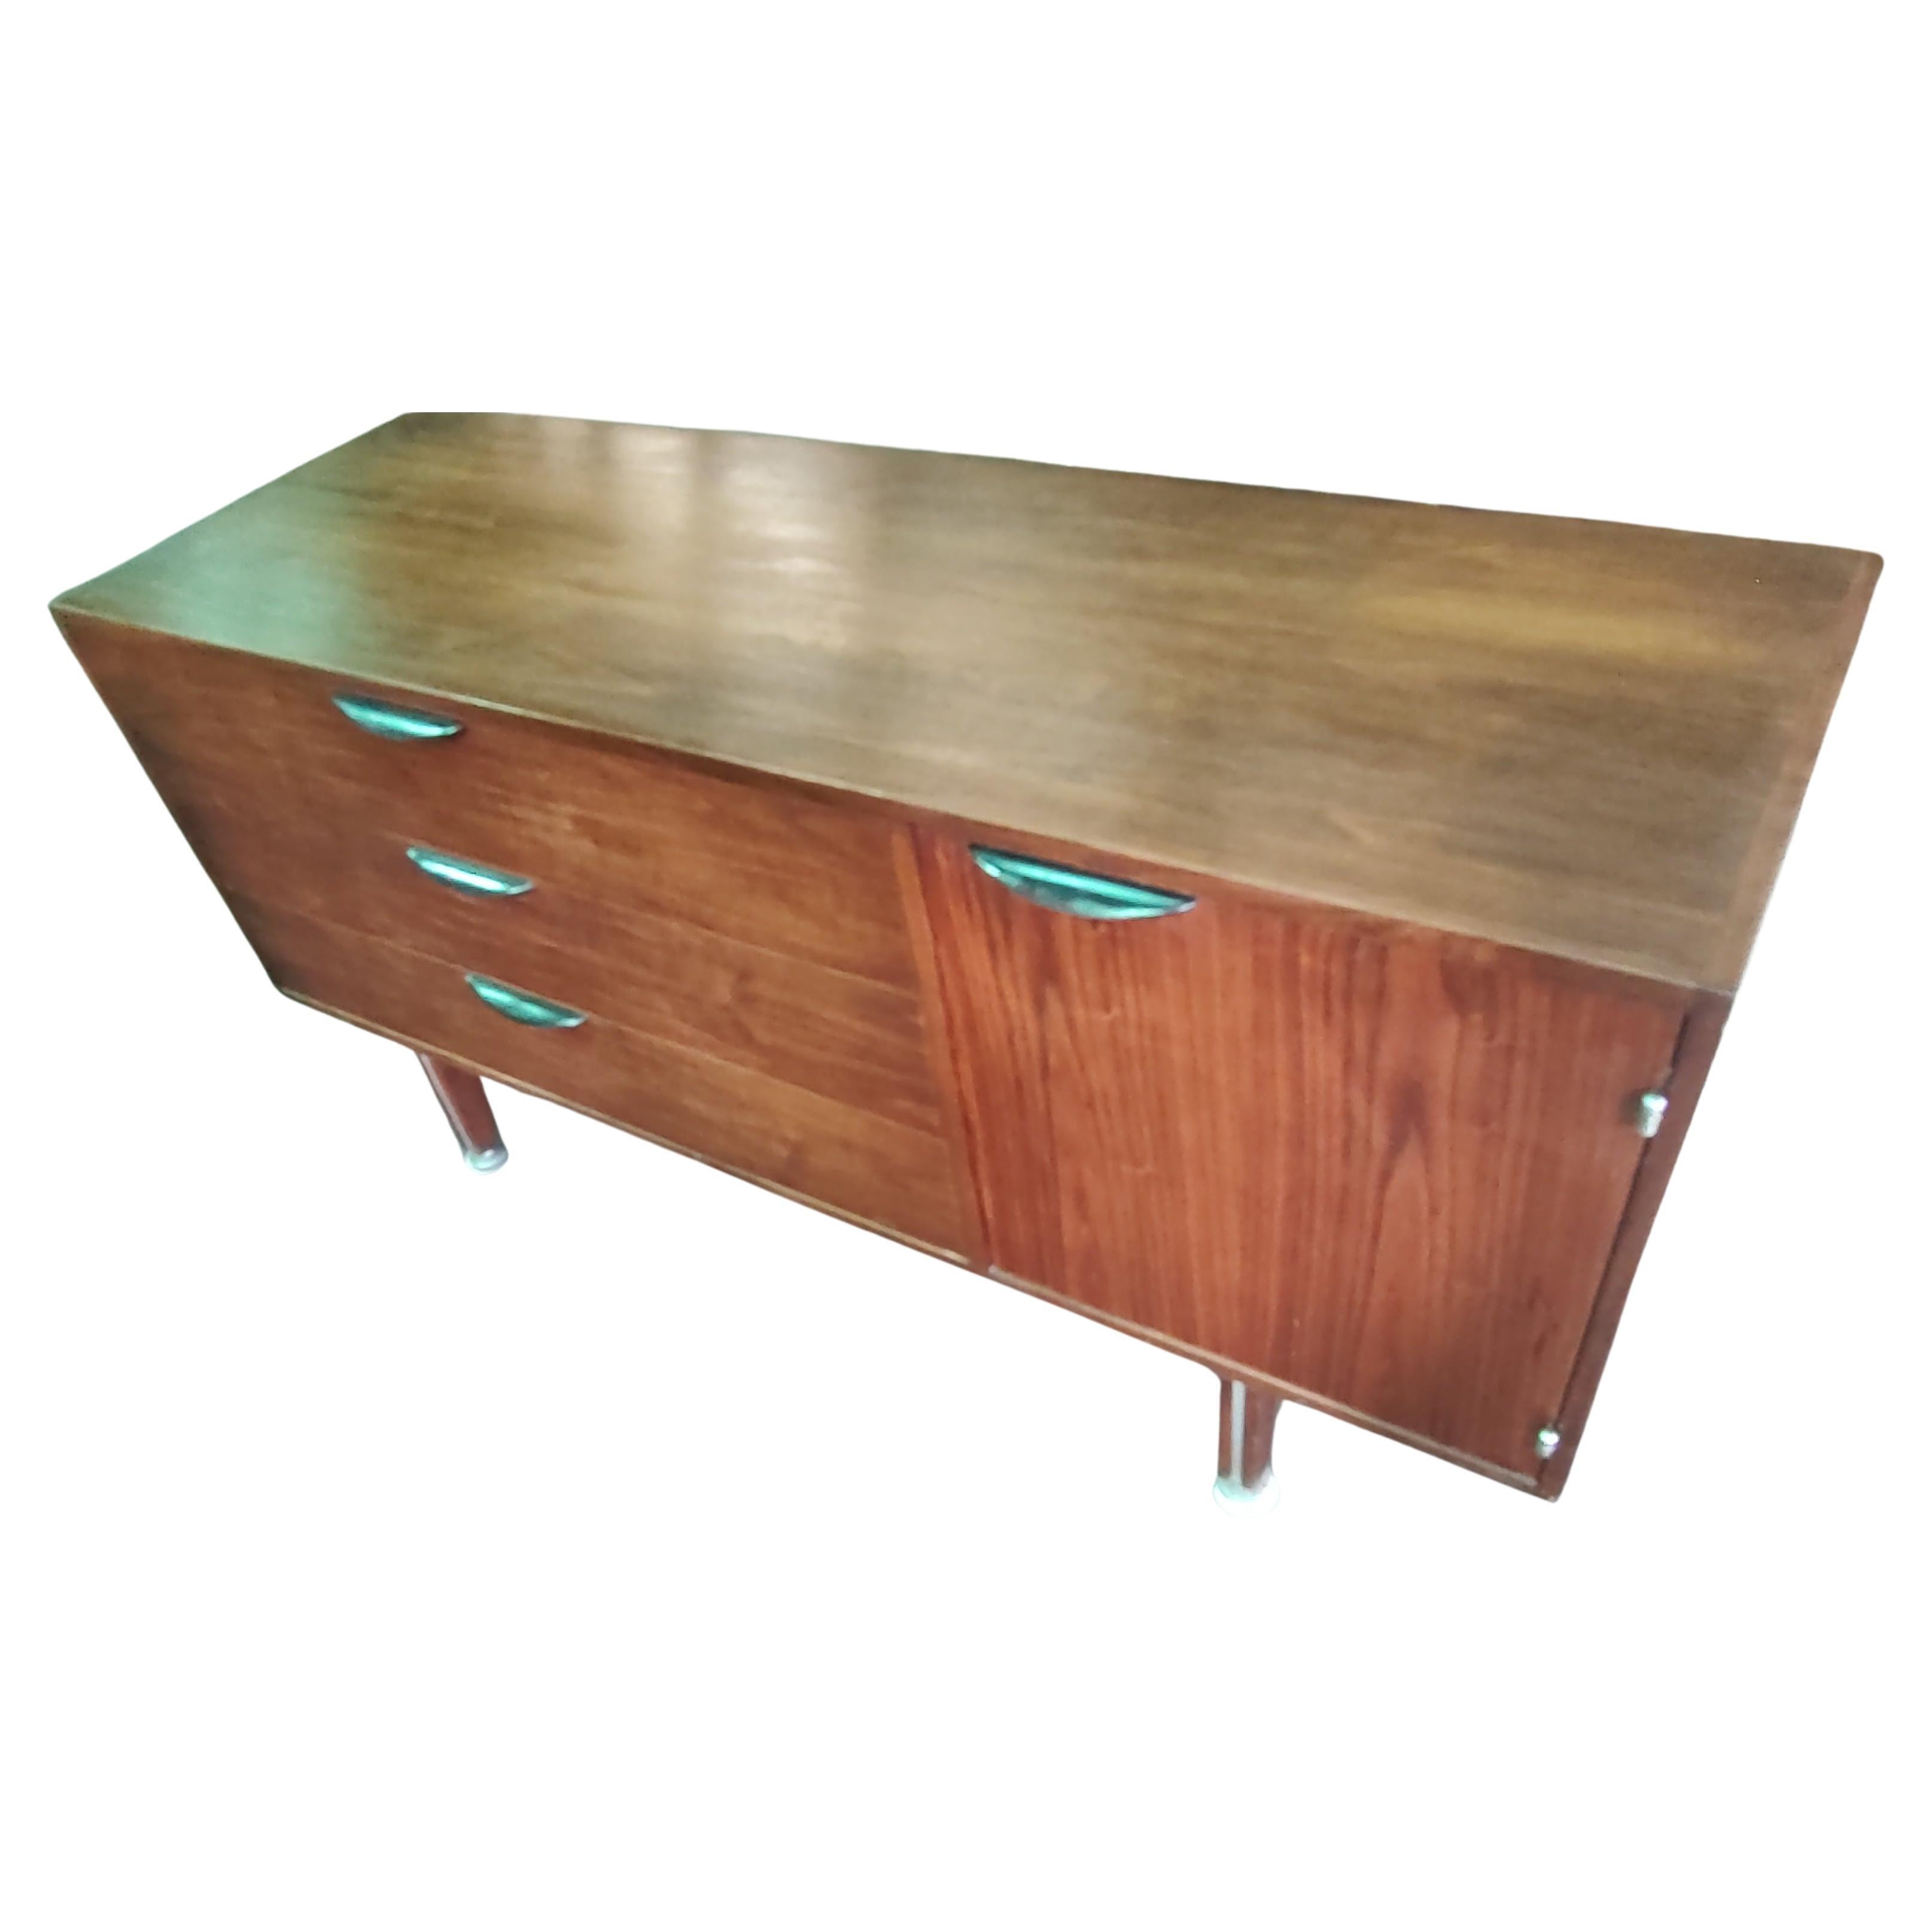 Hand-Crafted Mid-Century Modern Walnut W Aluminum Inlay Credenza by Jens Risom For Sale